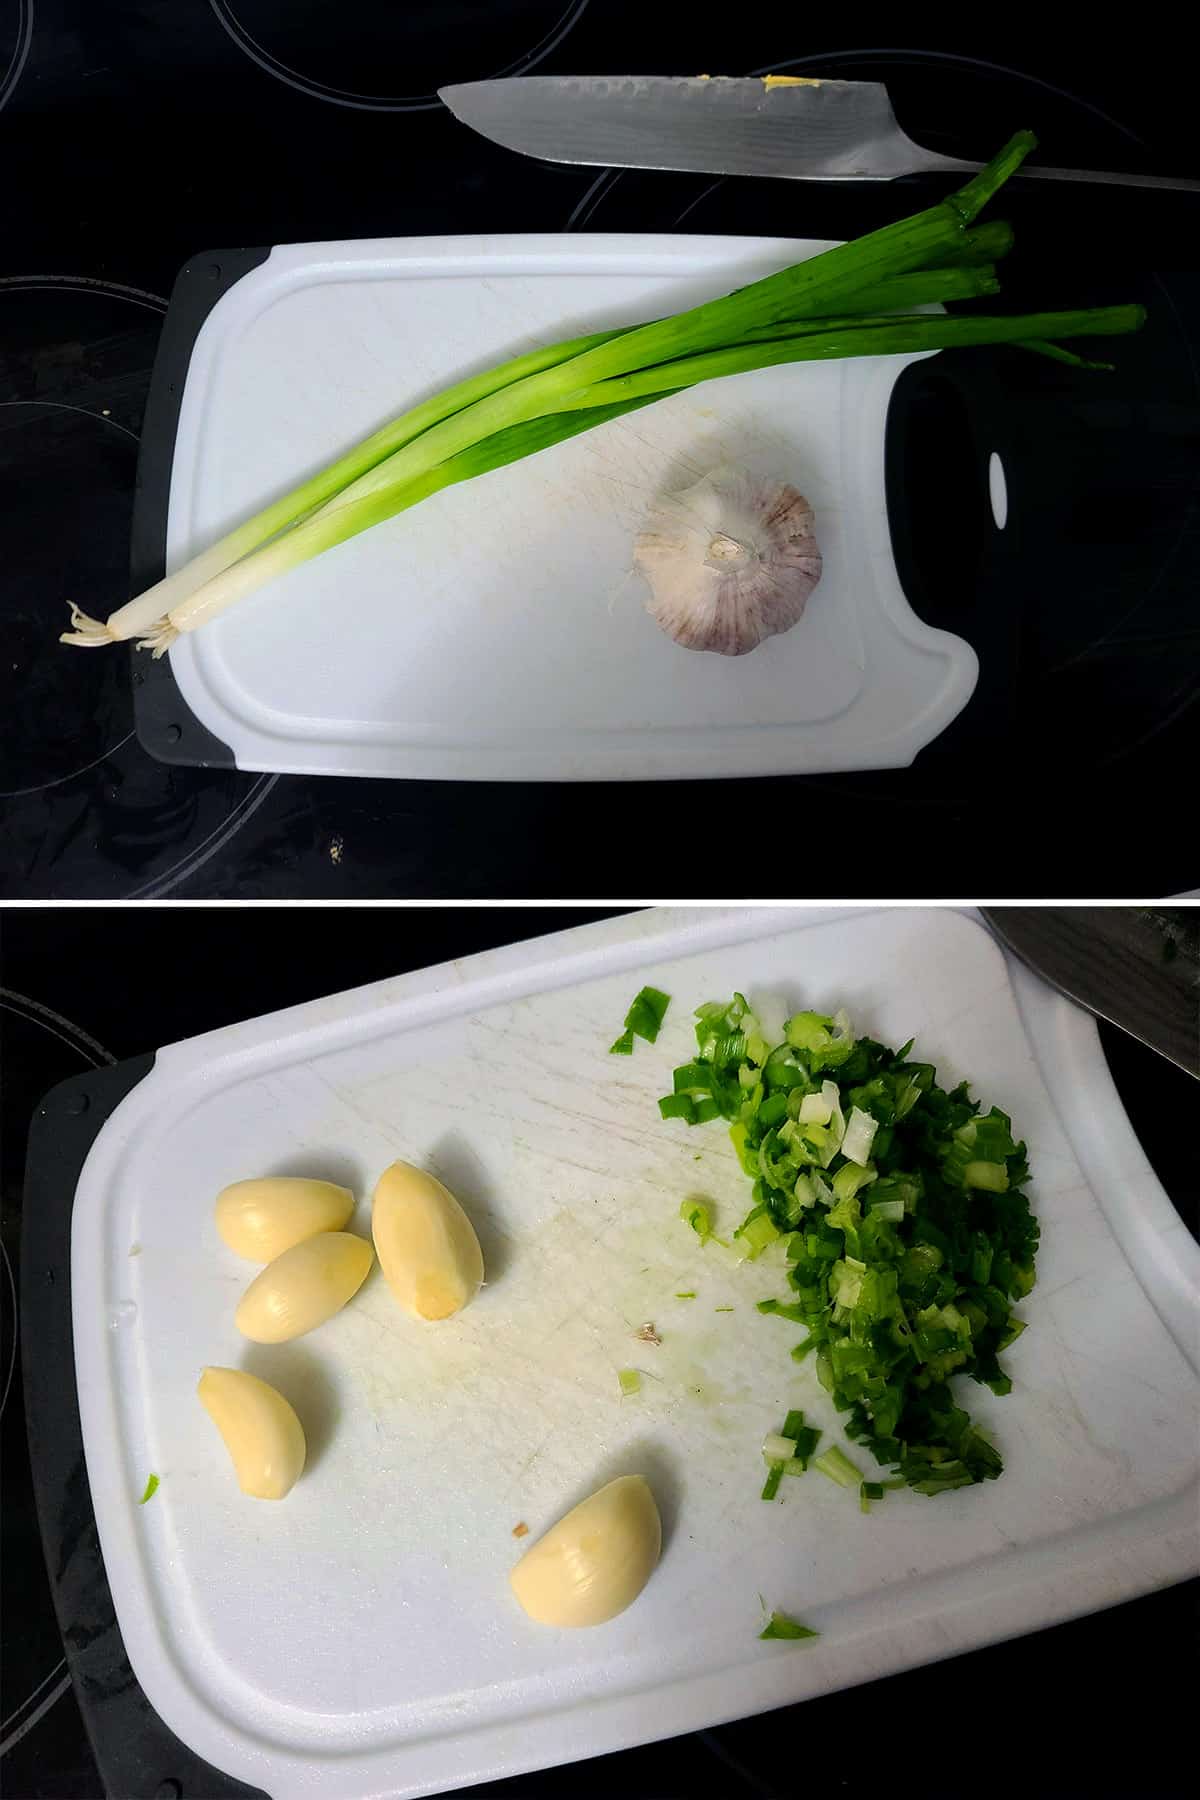 A 2 part image showing green onion and garlic being finely chopped.